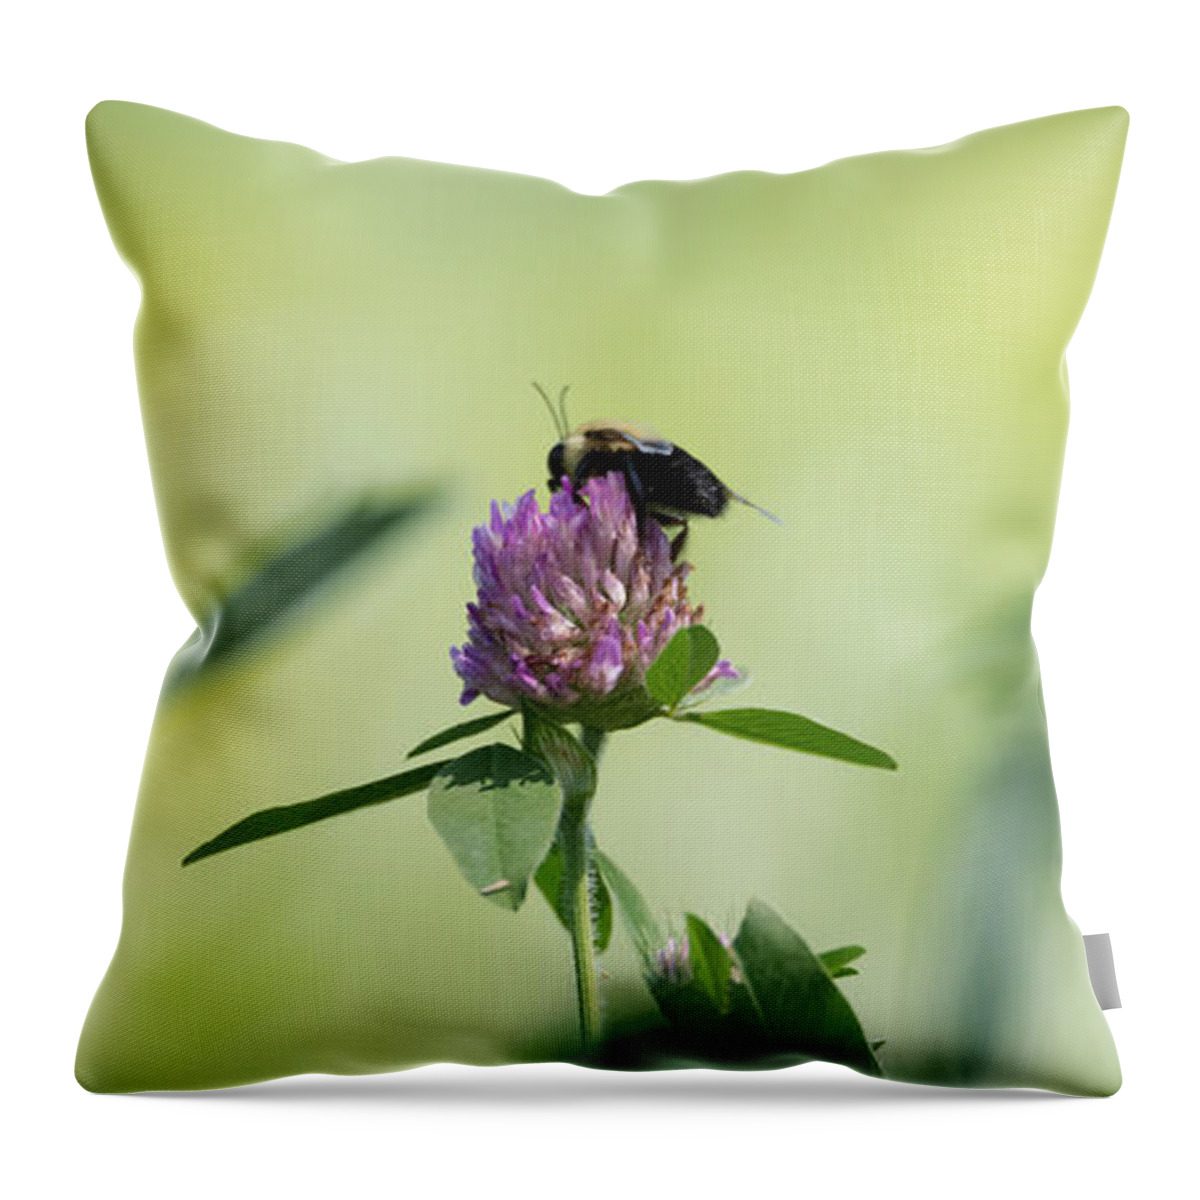 Pollination Throw Pillow featuring the photograph Pollination  by Holden The Moment